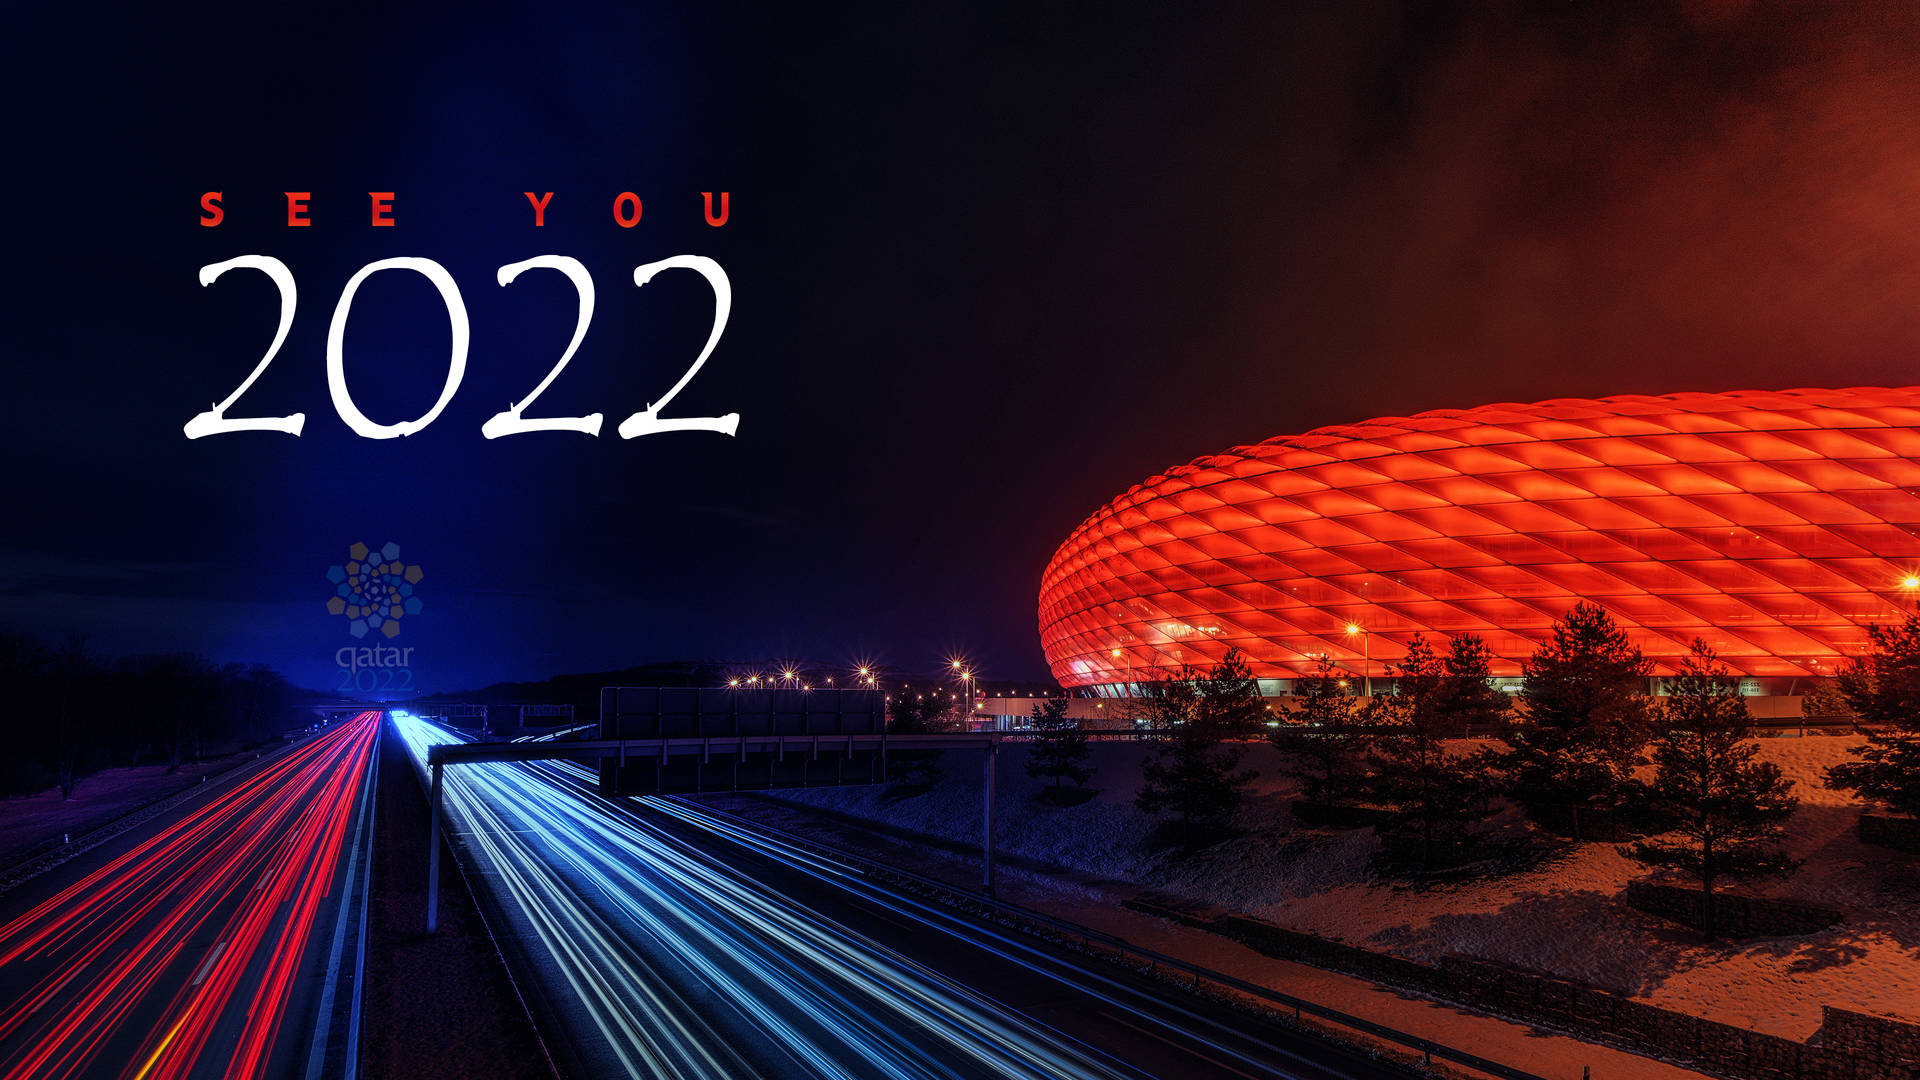 Get ready for an amazing football journey, the Qatar Stadium of the Fifa World Cup 2022! Wallpaper